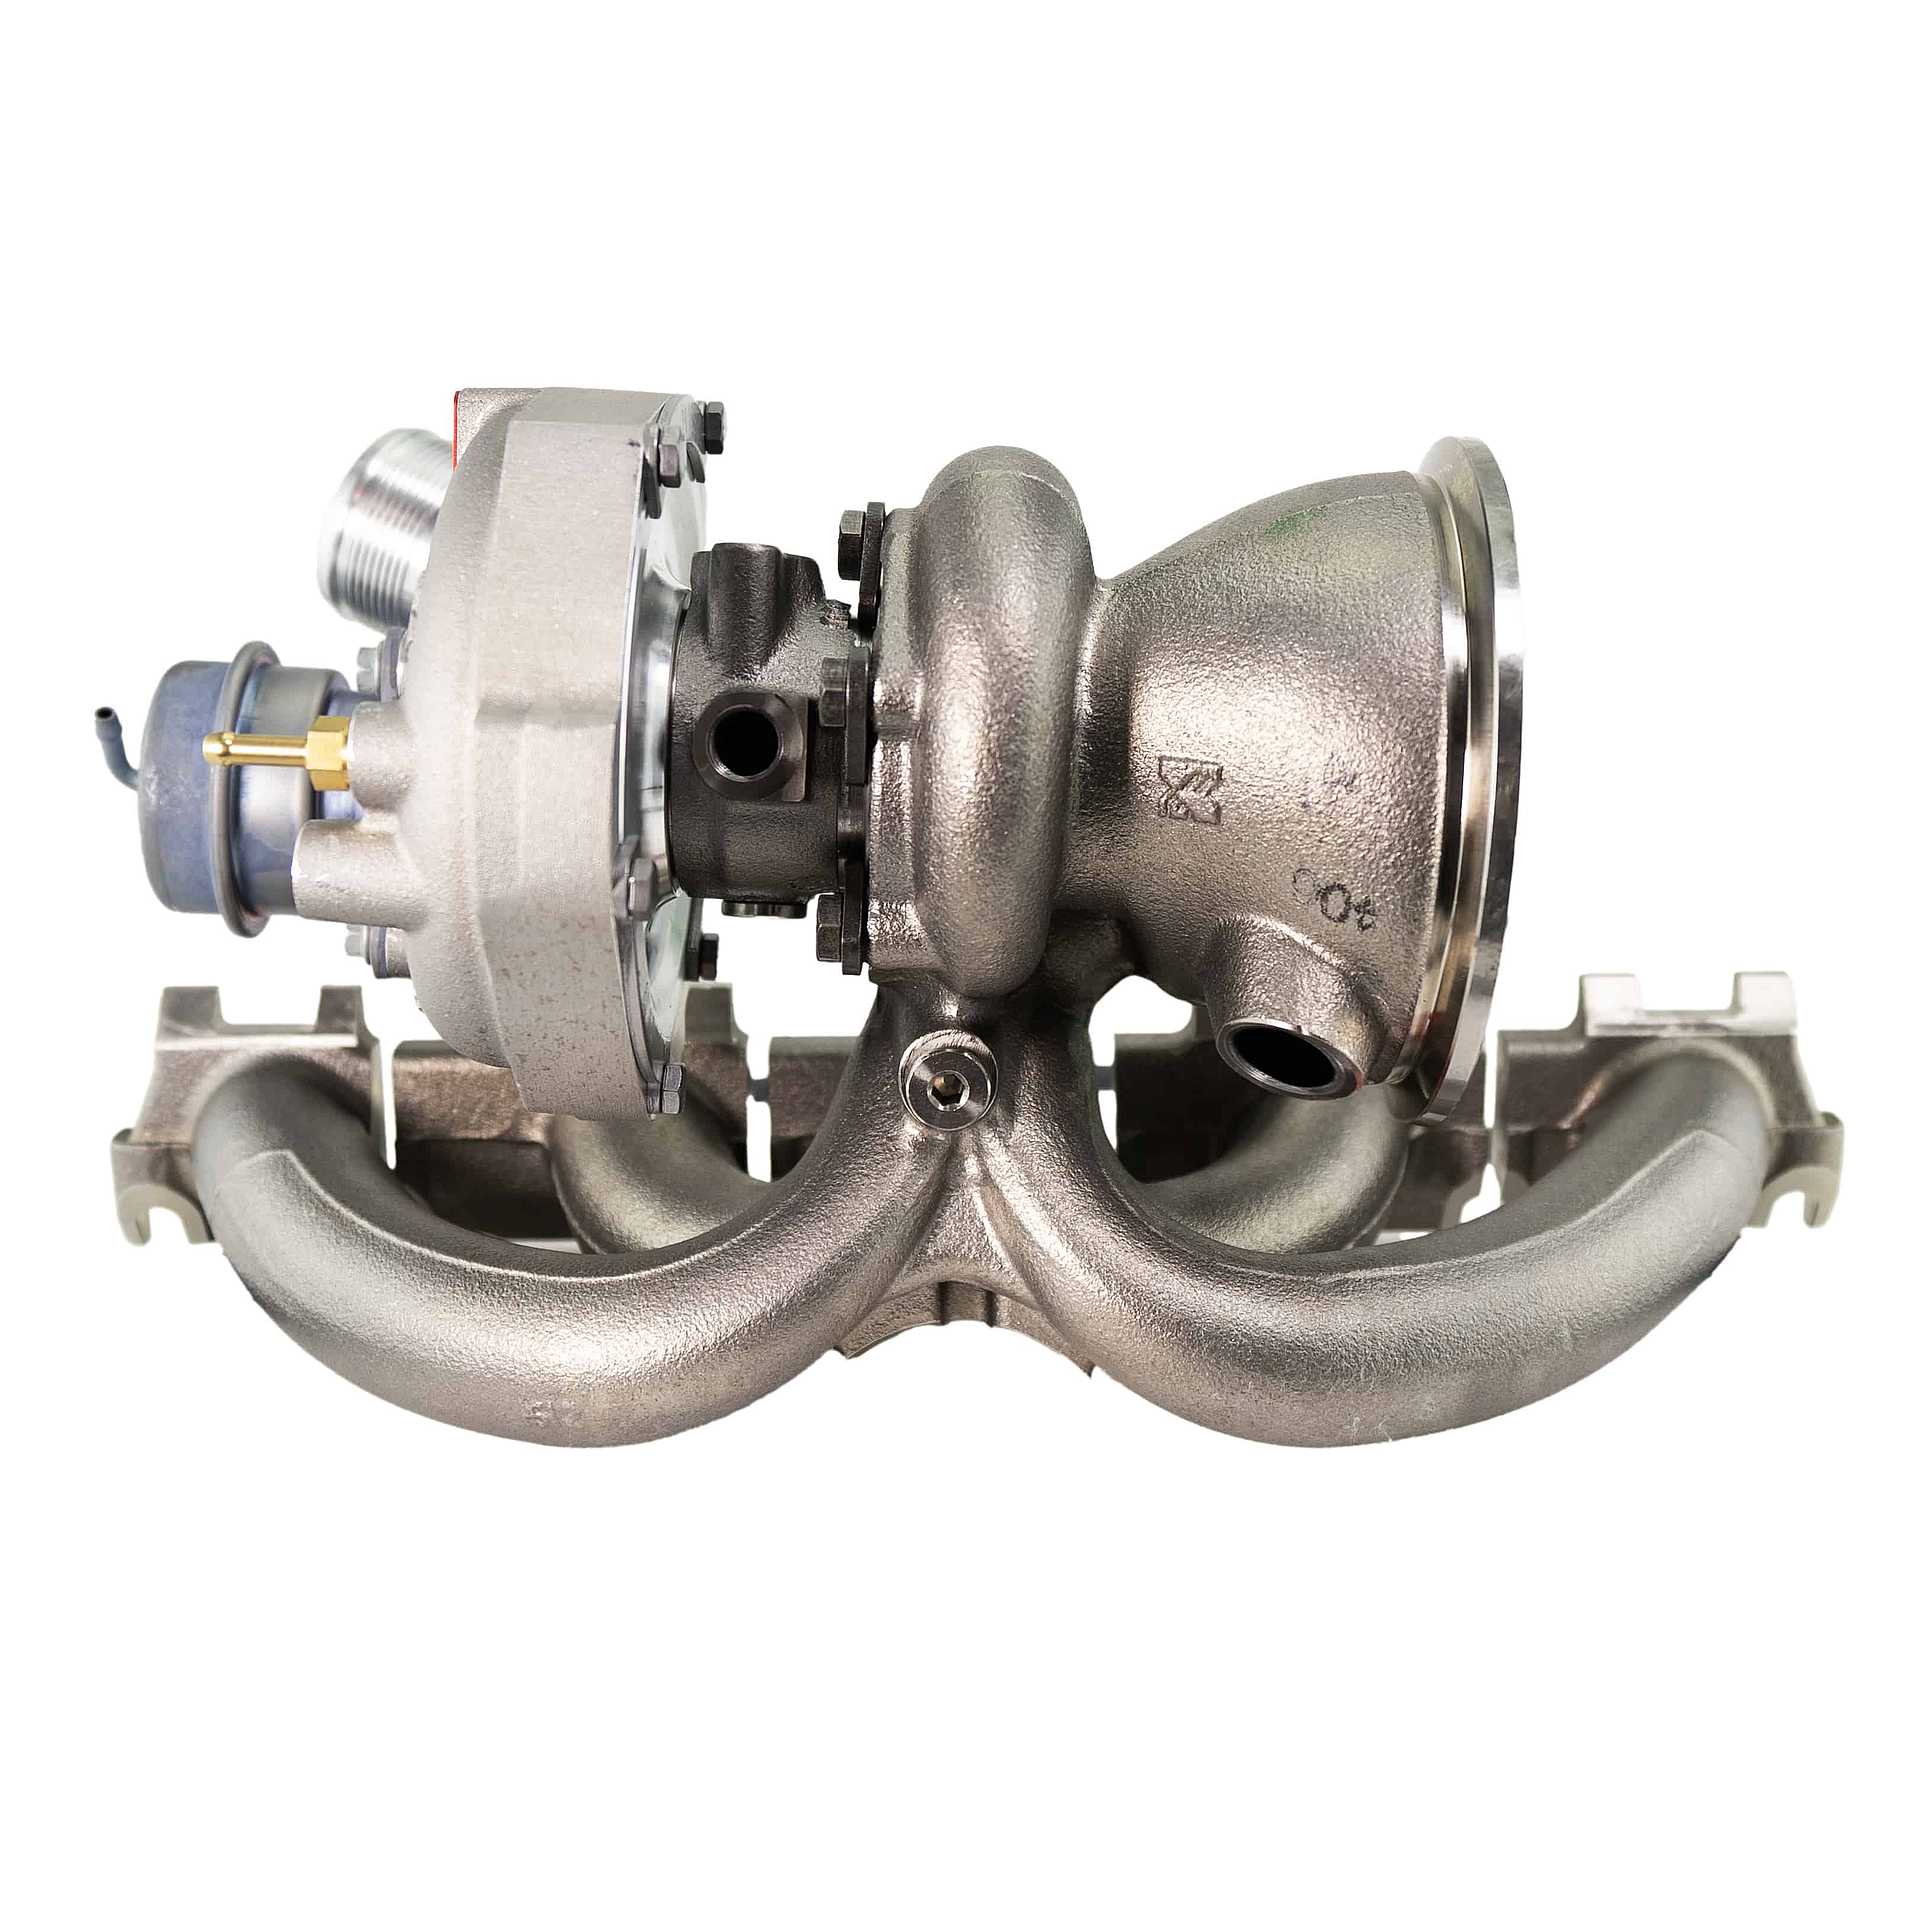 2.5L TFSI Audi TTRS & RS3 upgrade Hybrid turbocharger up to 550 HP Turbo-Total®